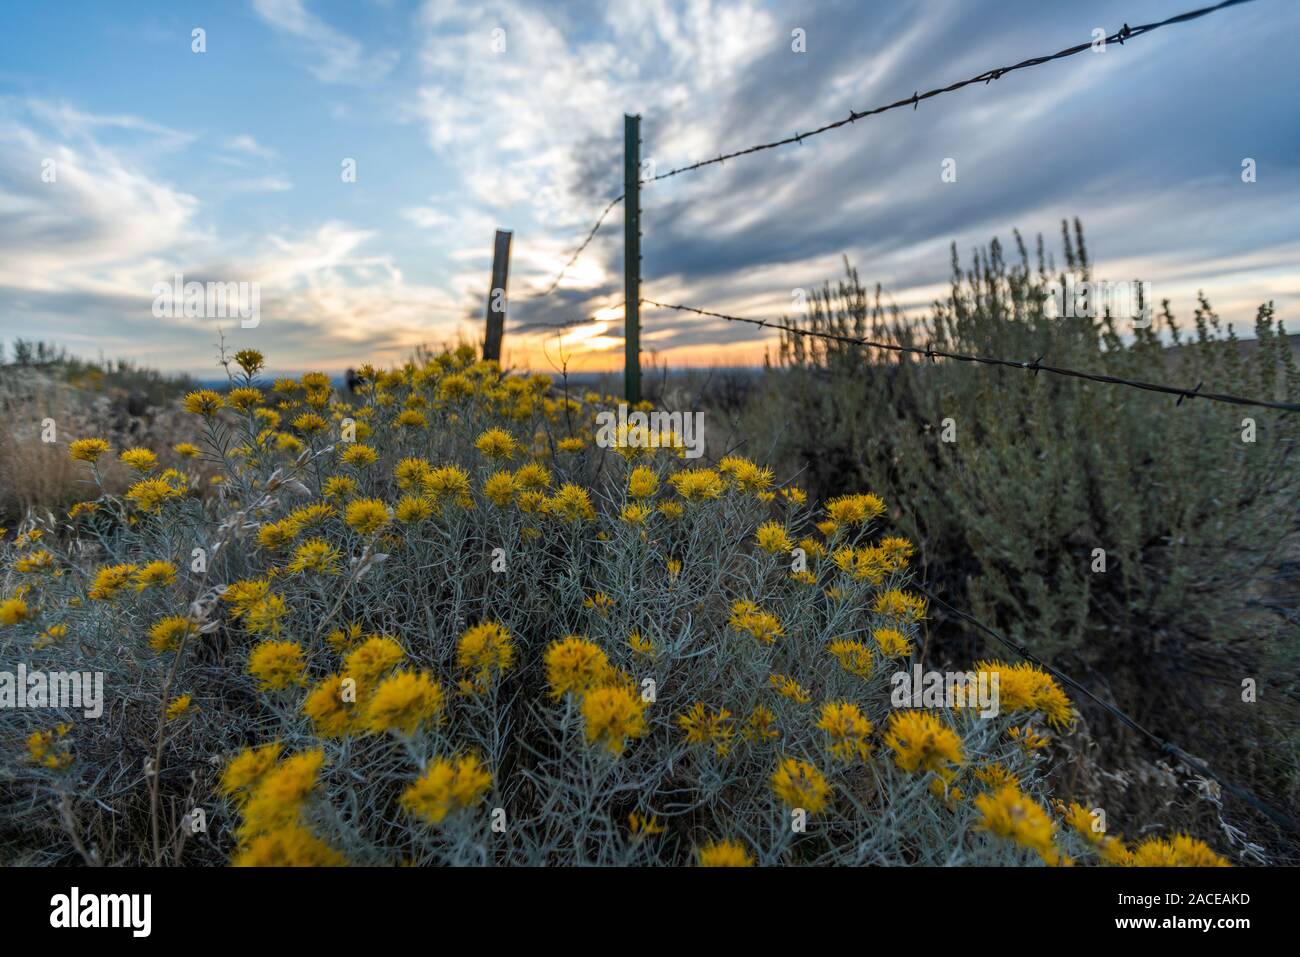 Sagebrush by barbed wire fence in Boise, Idaho, USA Stock Photo